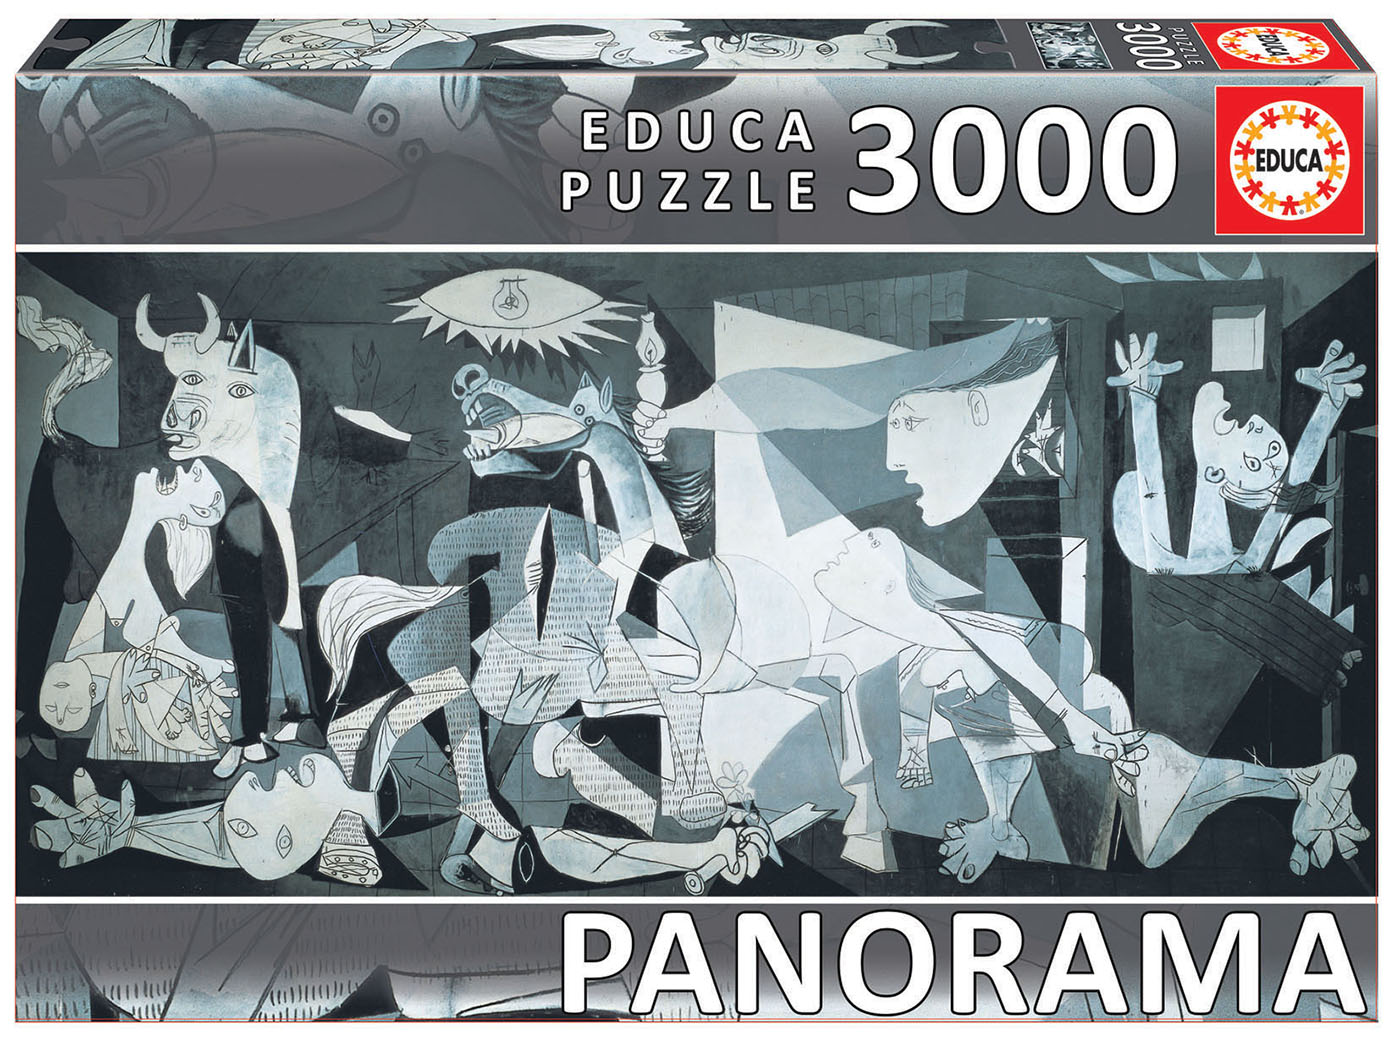 3000 Guernica, P. Picasso "Panorama"